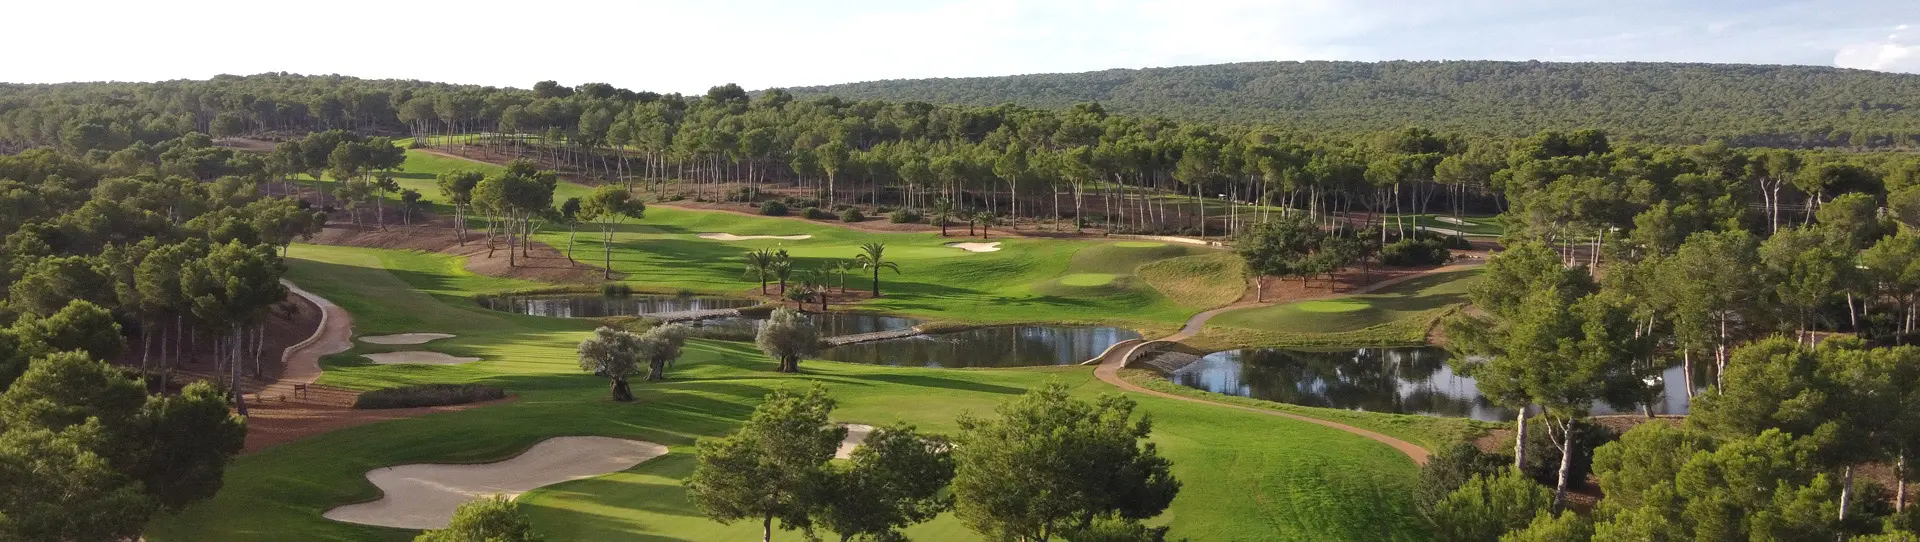 Spain golf holidays - T-Club 2 Rounds Package - Photo 2